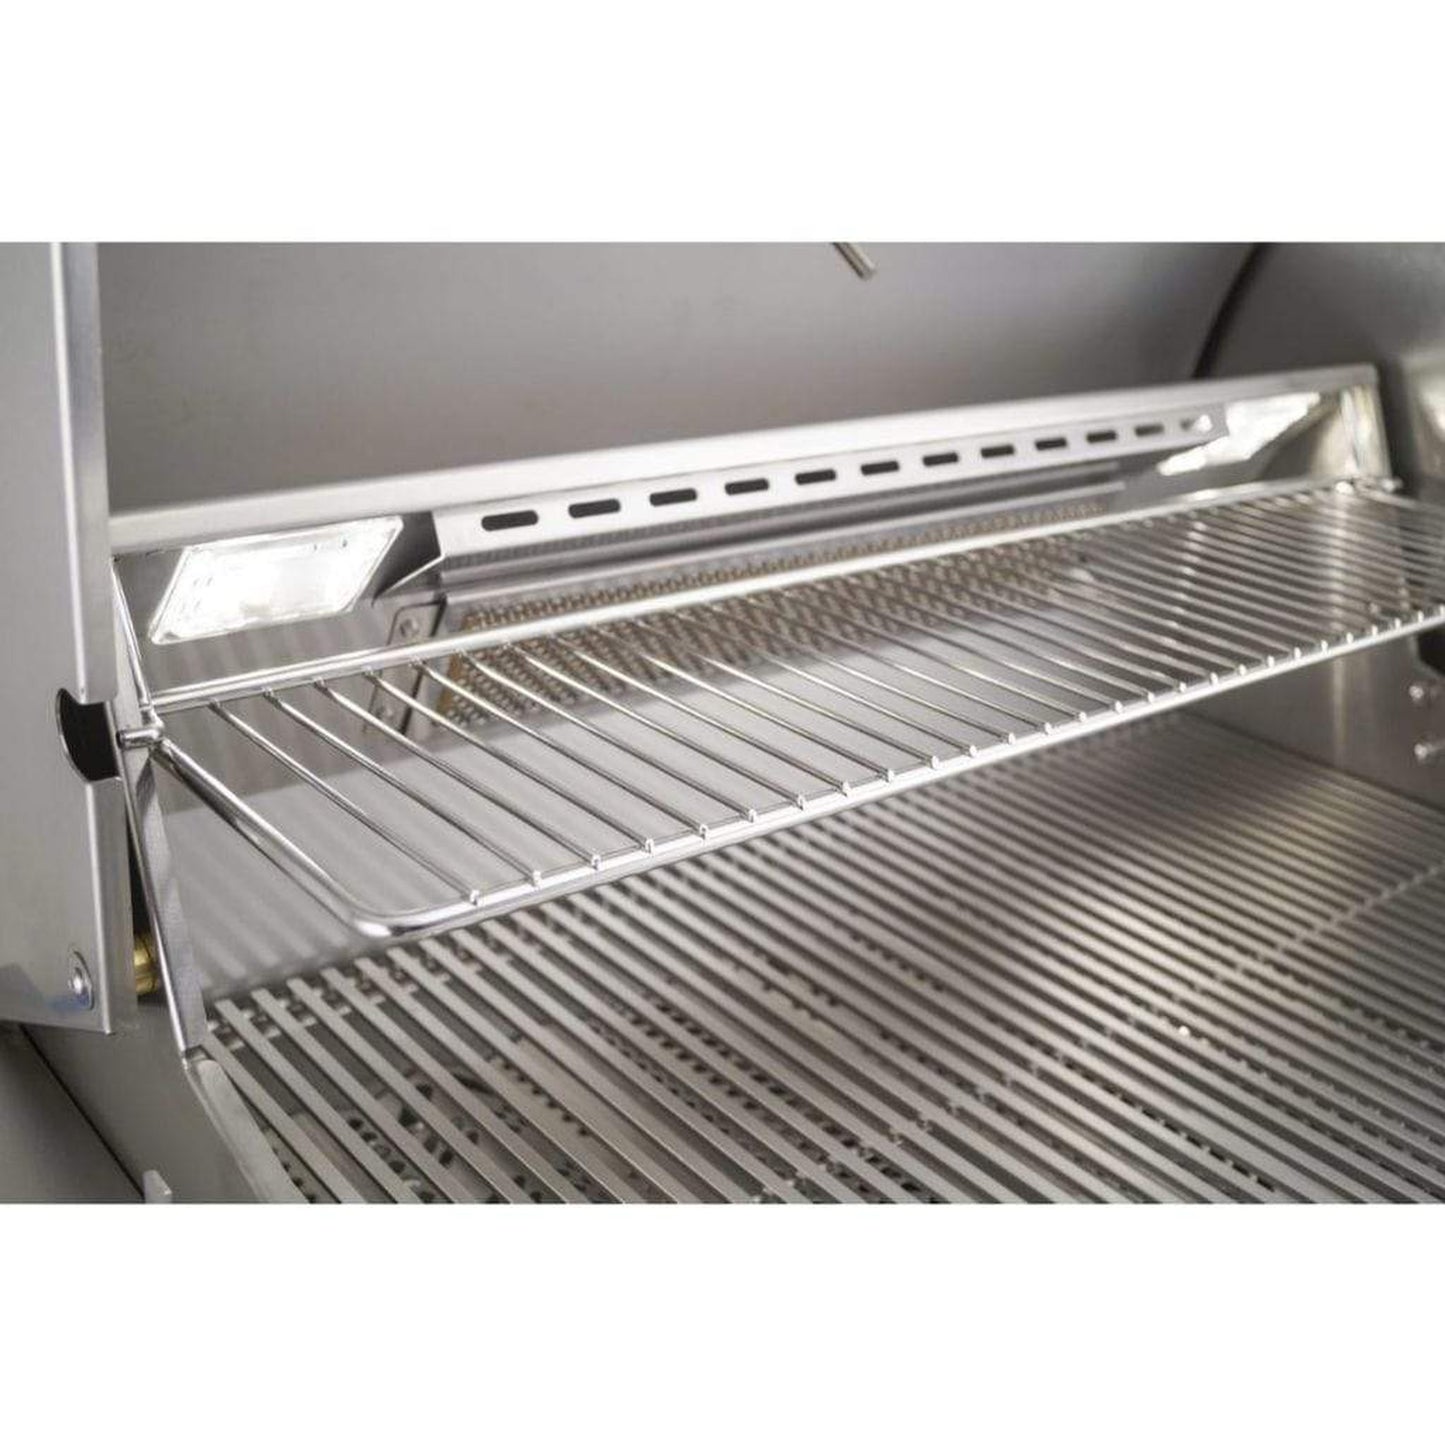 American Outdoor Grill 24" T-Series Portable 2-Burner Gas Grill